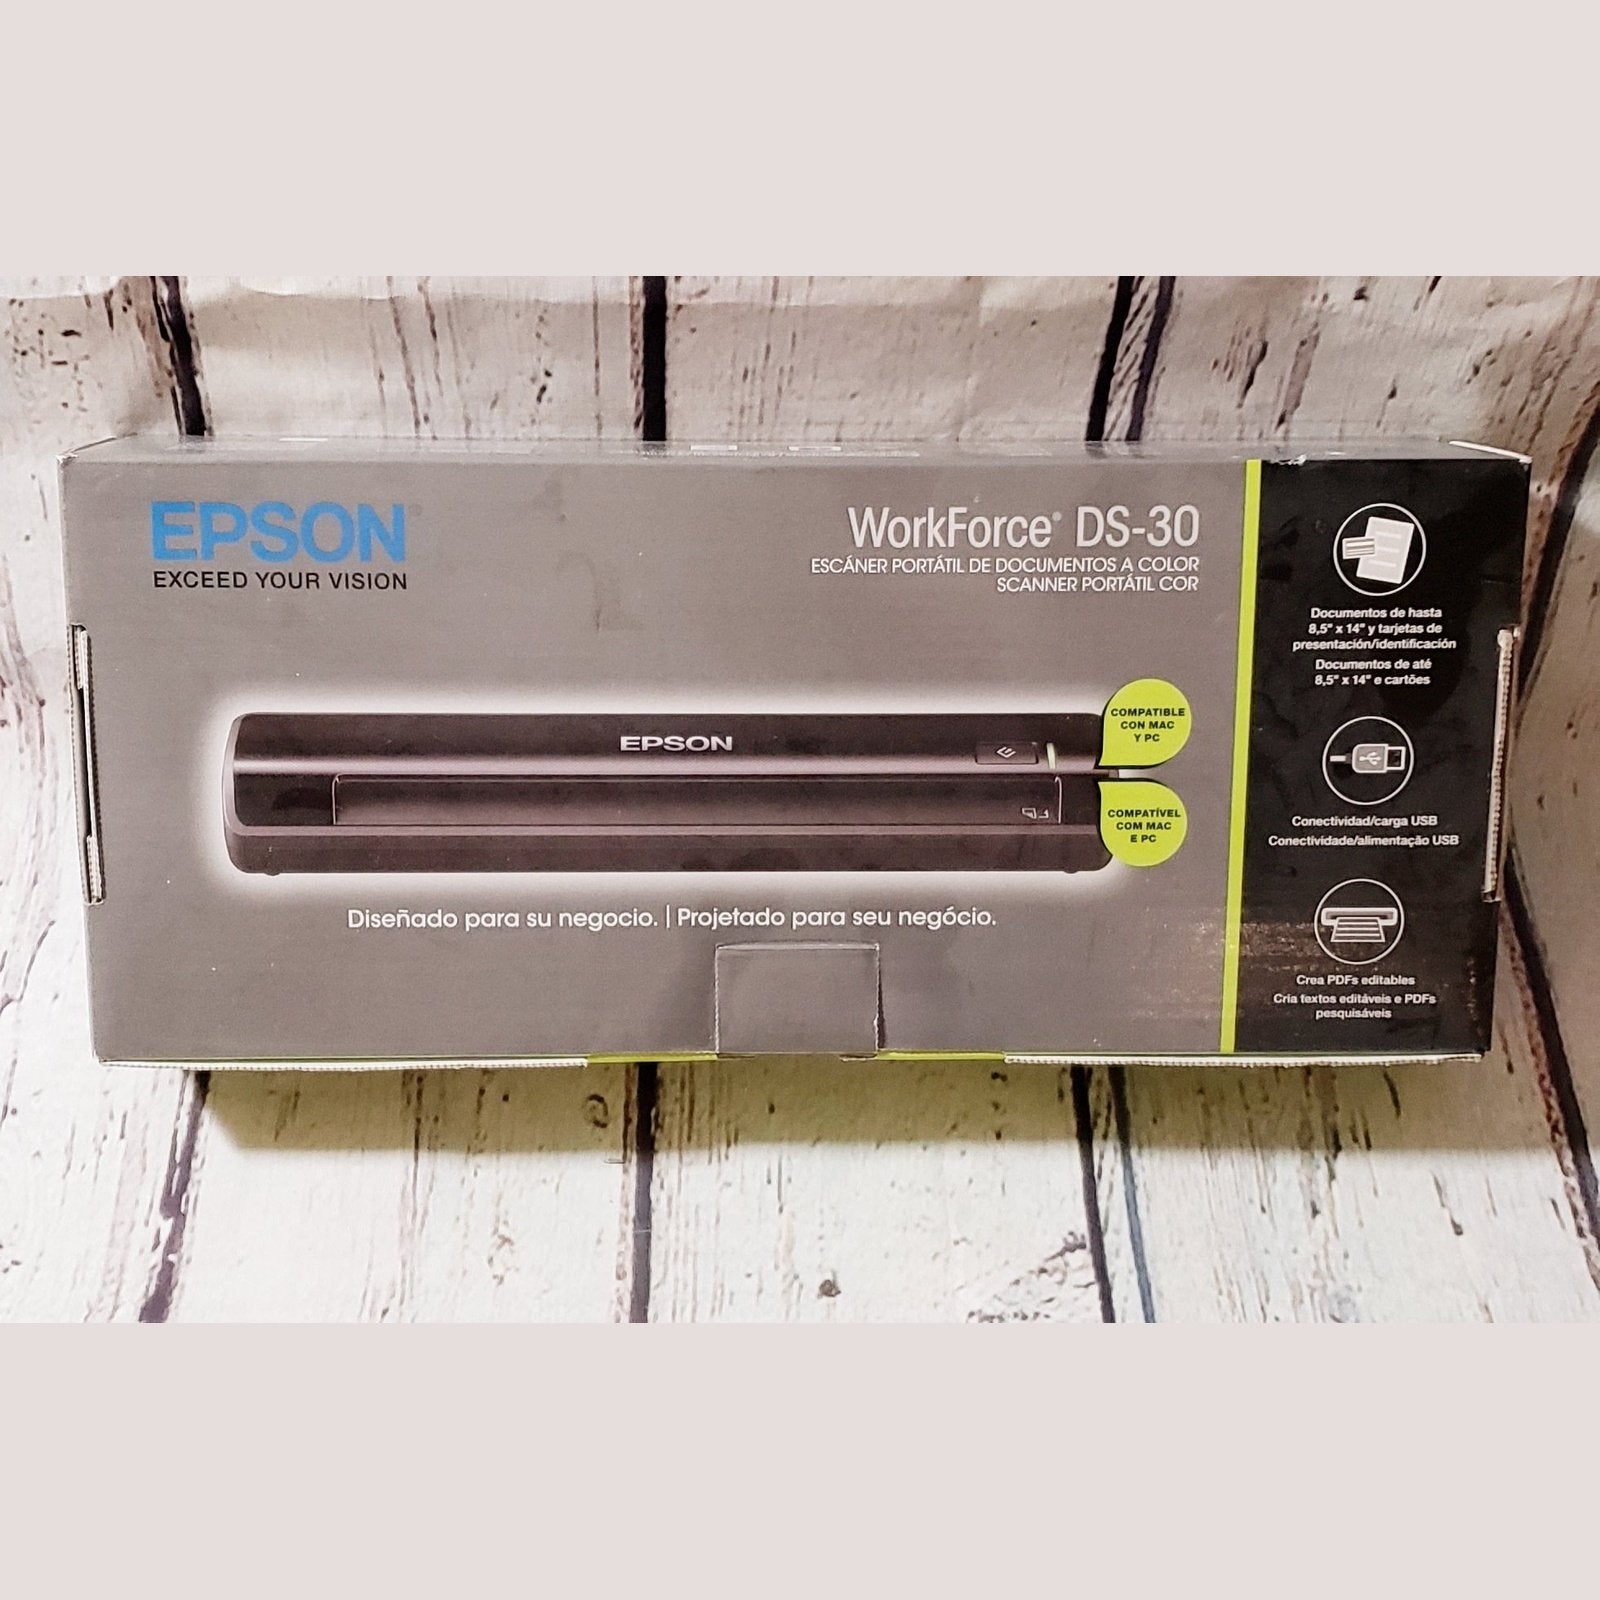 Epson WorkForce DS-30 Color Portable Scanner - NEW Never Used